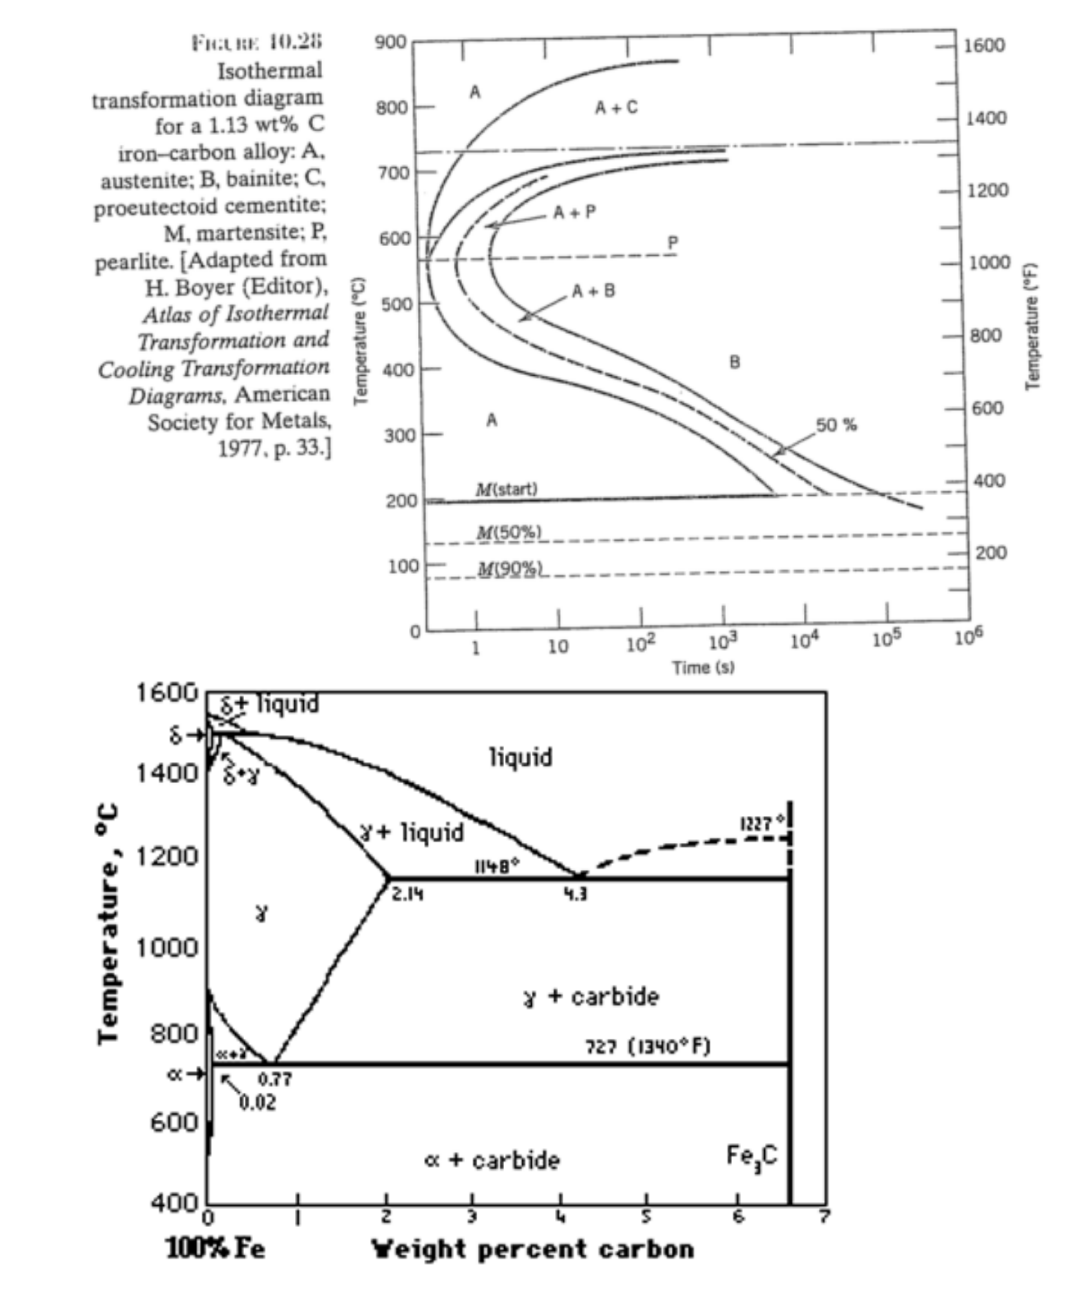 FuLRE 10.28
Isothermal
900
1600
transformation diagram
for a 1.13 wt% C
iron-carbon alloy: A,
austenite; B, bainite; C,
proeutectoid cementite;
M, martensite; P,
pearlite. [Adapted from
H. Boyer (Editor),
Atlas of Isothermal
Transformation and
Cooling Transformation
Diagrams, American
Society for Metals,
1977, p. 33.]
800
A +C
1400
700
1200
A+P
600
1000
A +B
500
800
B
400
600
50 %
300E
400
M(start)
200
M(50%)
200
100
_M19Q%L.
102
103
104
105
106
1
10
Time (s)
1600
Fiquid
liquid
1400
1227
+ liquid
1200
I148*
2.14
4.3
1000
y + carbide
27 (1340°F)
800
0.77
0.02
600
« + carbide
Fe,C
400
100% Fe
Yeight percent carbon
Temperature, °C
Temperature (*C)
Temperature (°F)
